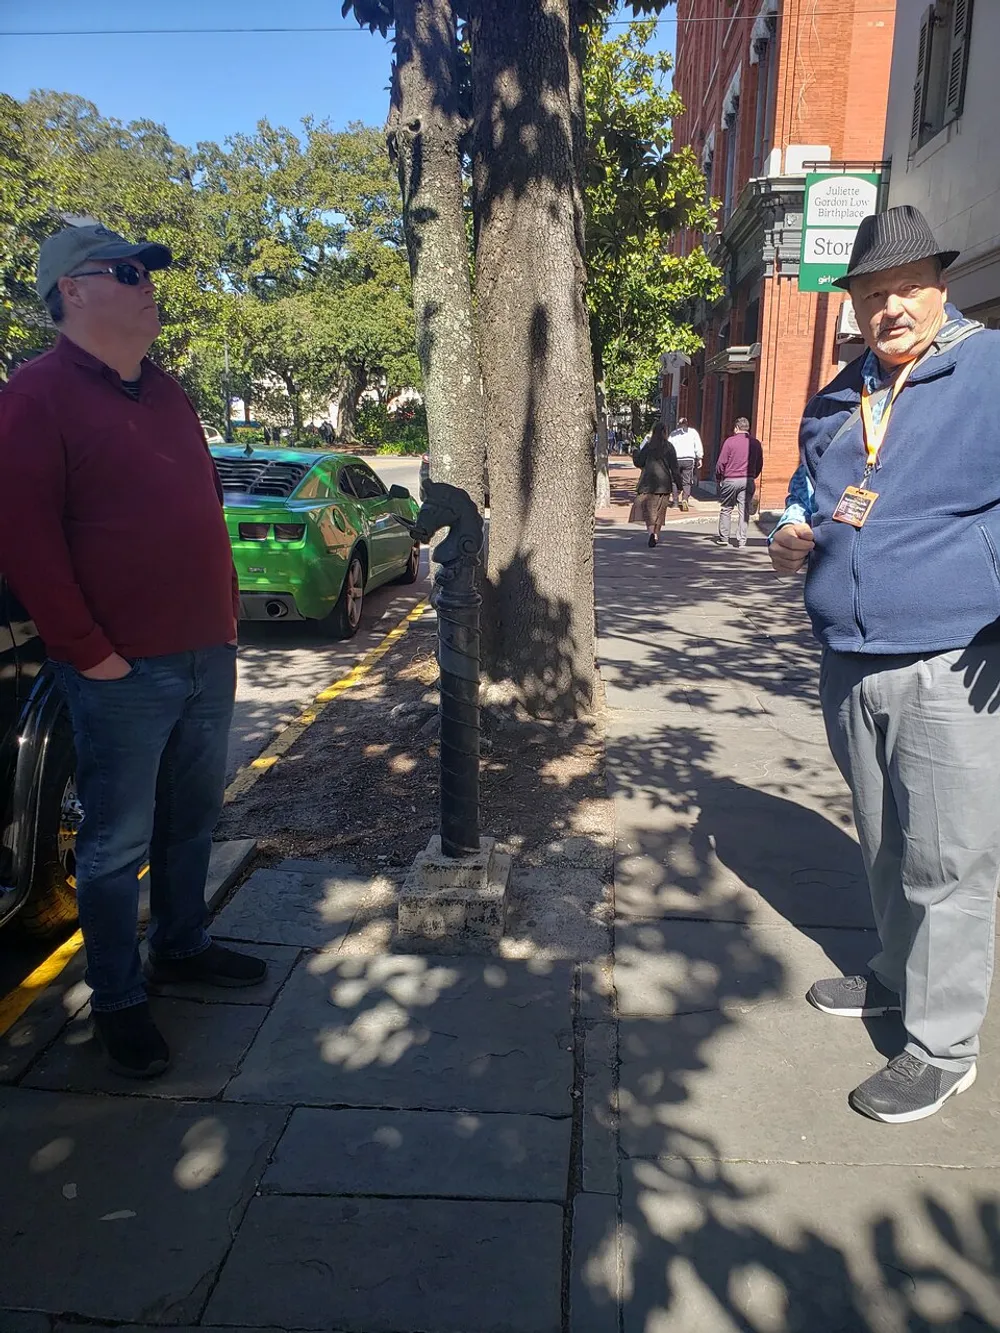 Two men are standing on a sidewalk having a conversation with a green car parked in the background and the sign Juliette Gordon Low Birthplace visible suggesting the location might be of historical significance